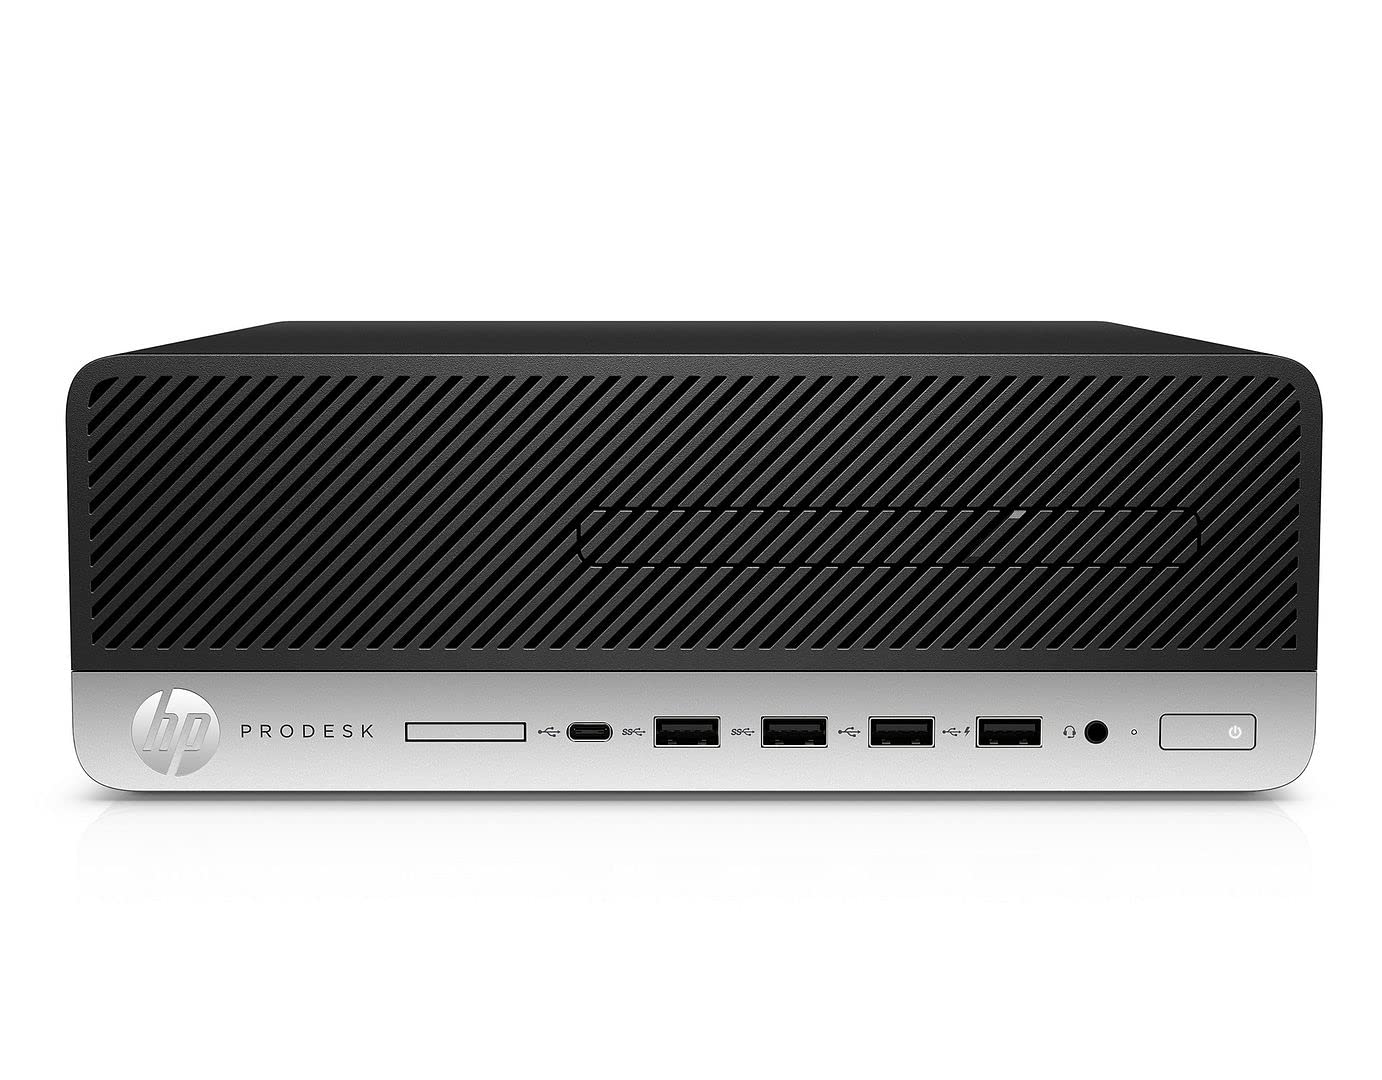 HP 600 G4 SFF Desktop Intel i5-8400 UP to 4.00GHz 16GB DDR4 256GB NVMe SSD Built-in AX210 Wi-Fi 6E BT Dual Monitor Support Wireless Keyboard and Mouse Win11 Pro (Renewed)